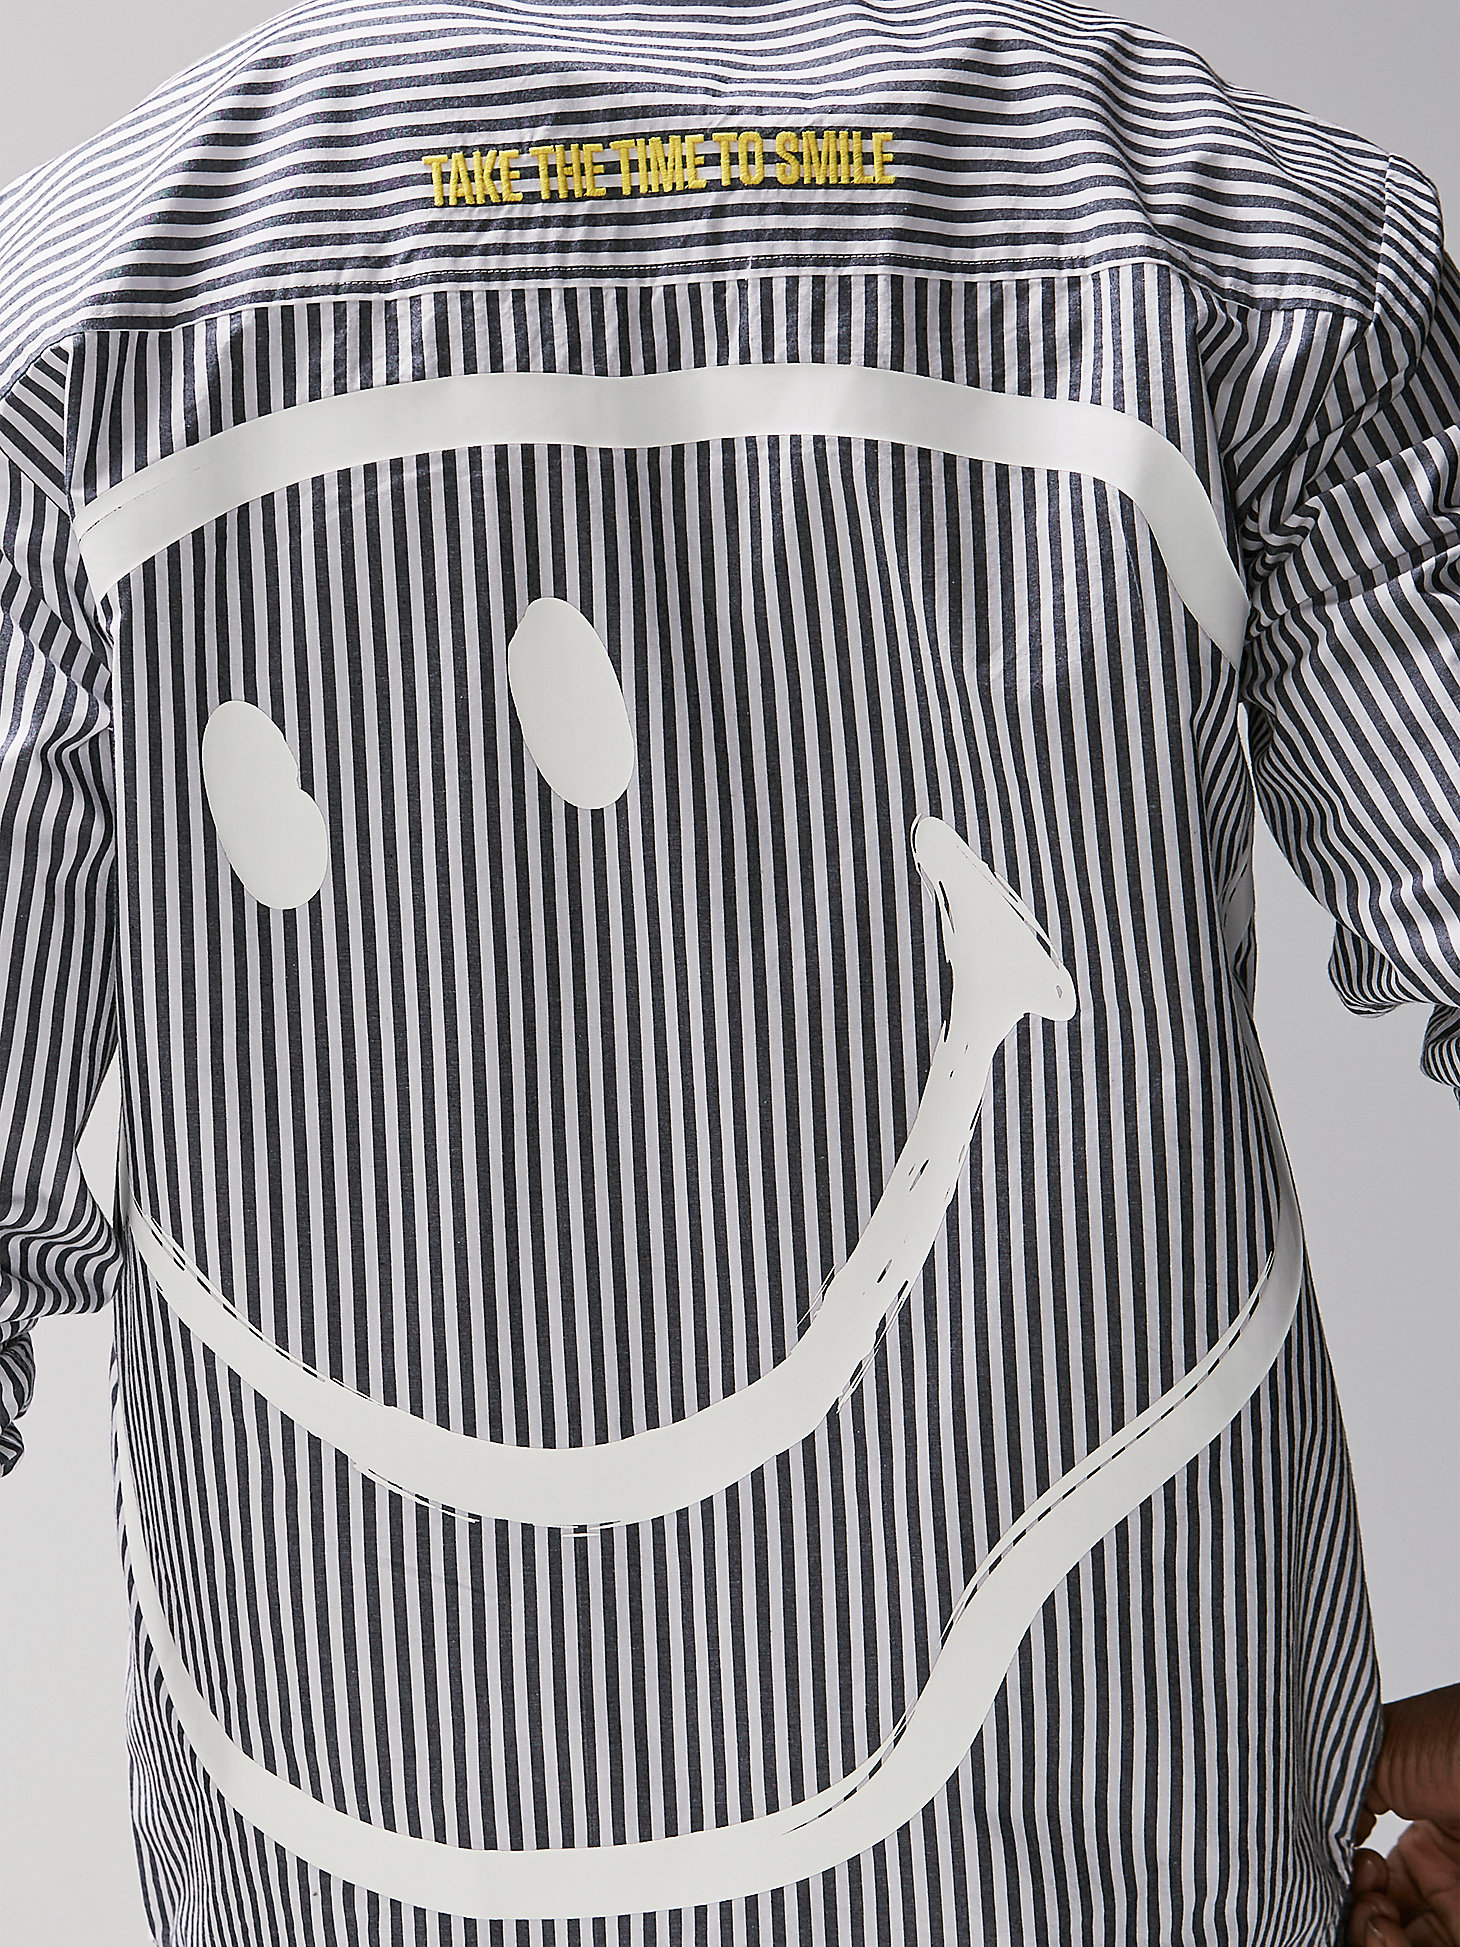 Men's Lee® X Smiley® Painted Smile Button Down Stripe Shirt in White alternative view 4